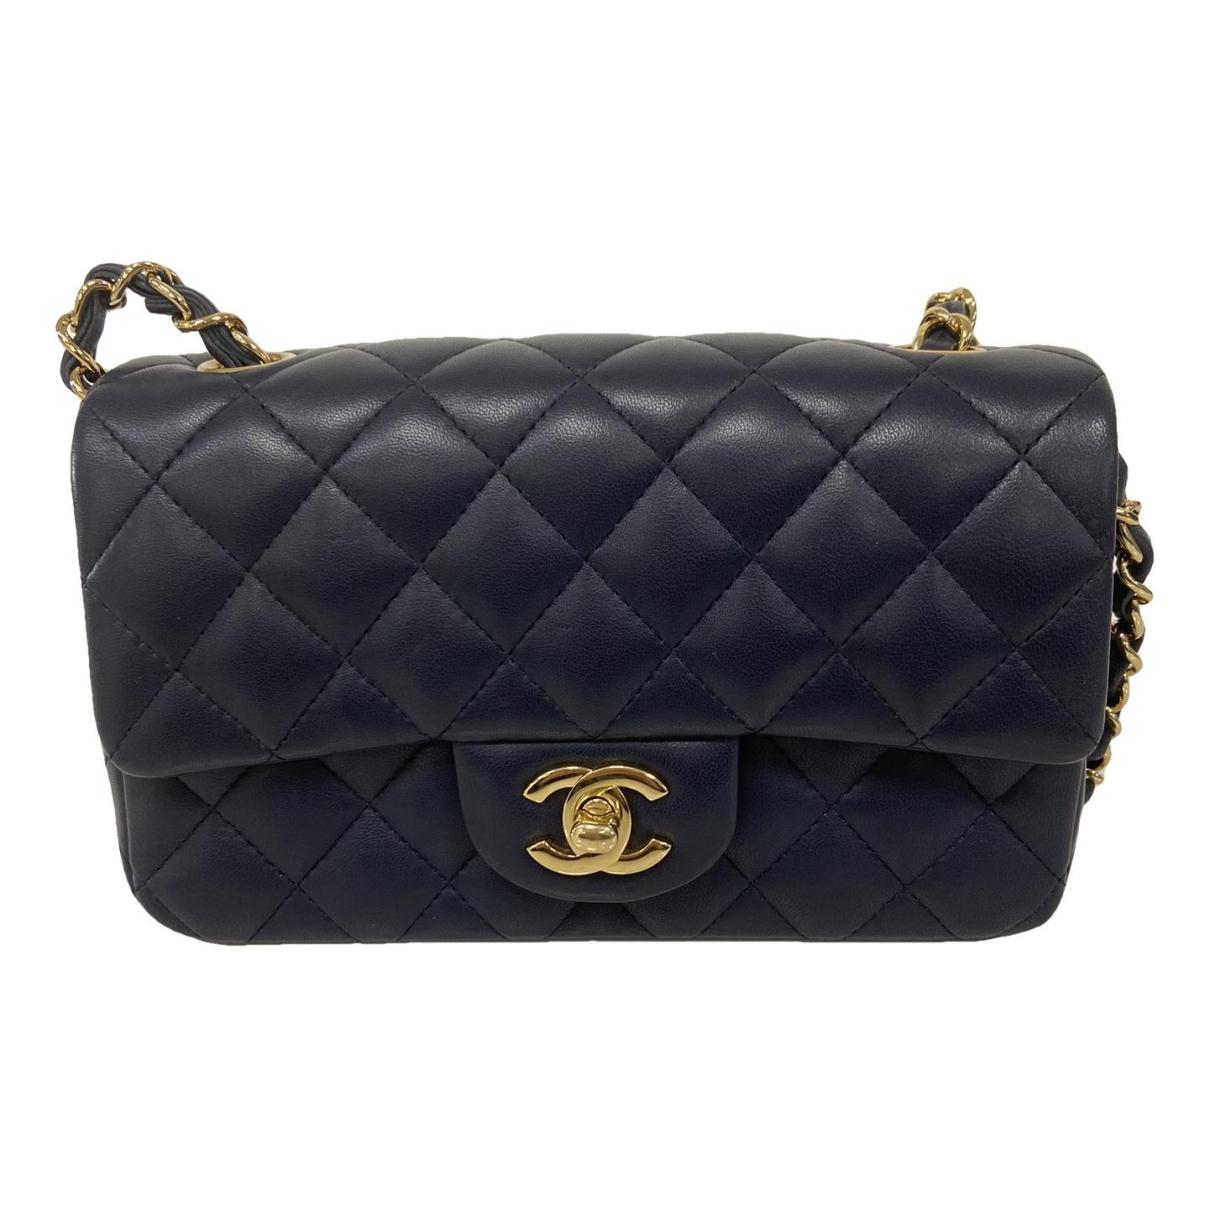 Timeless/classique leather crossbody bag Chanel Black in Leather - 38005840